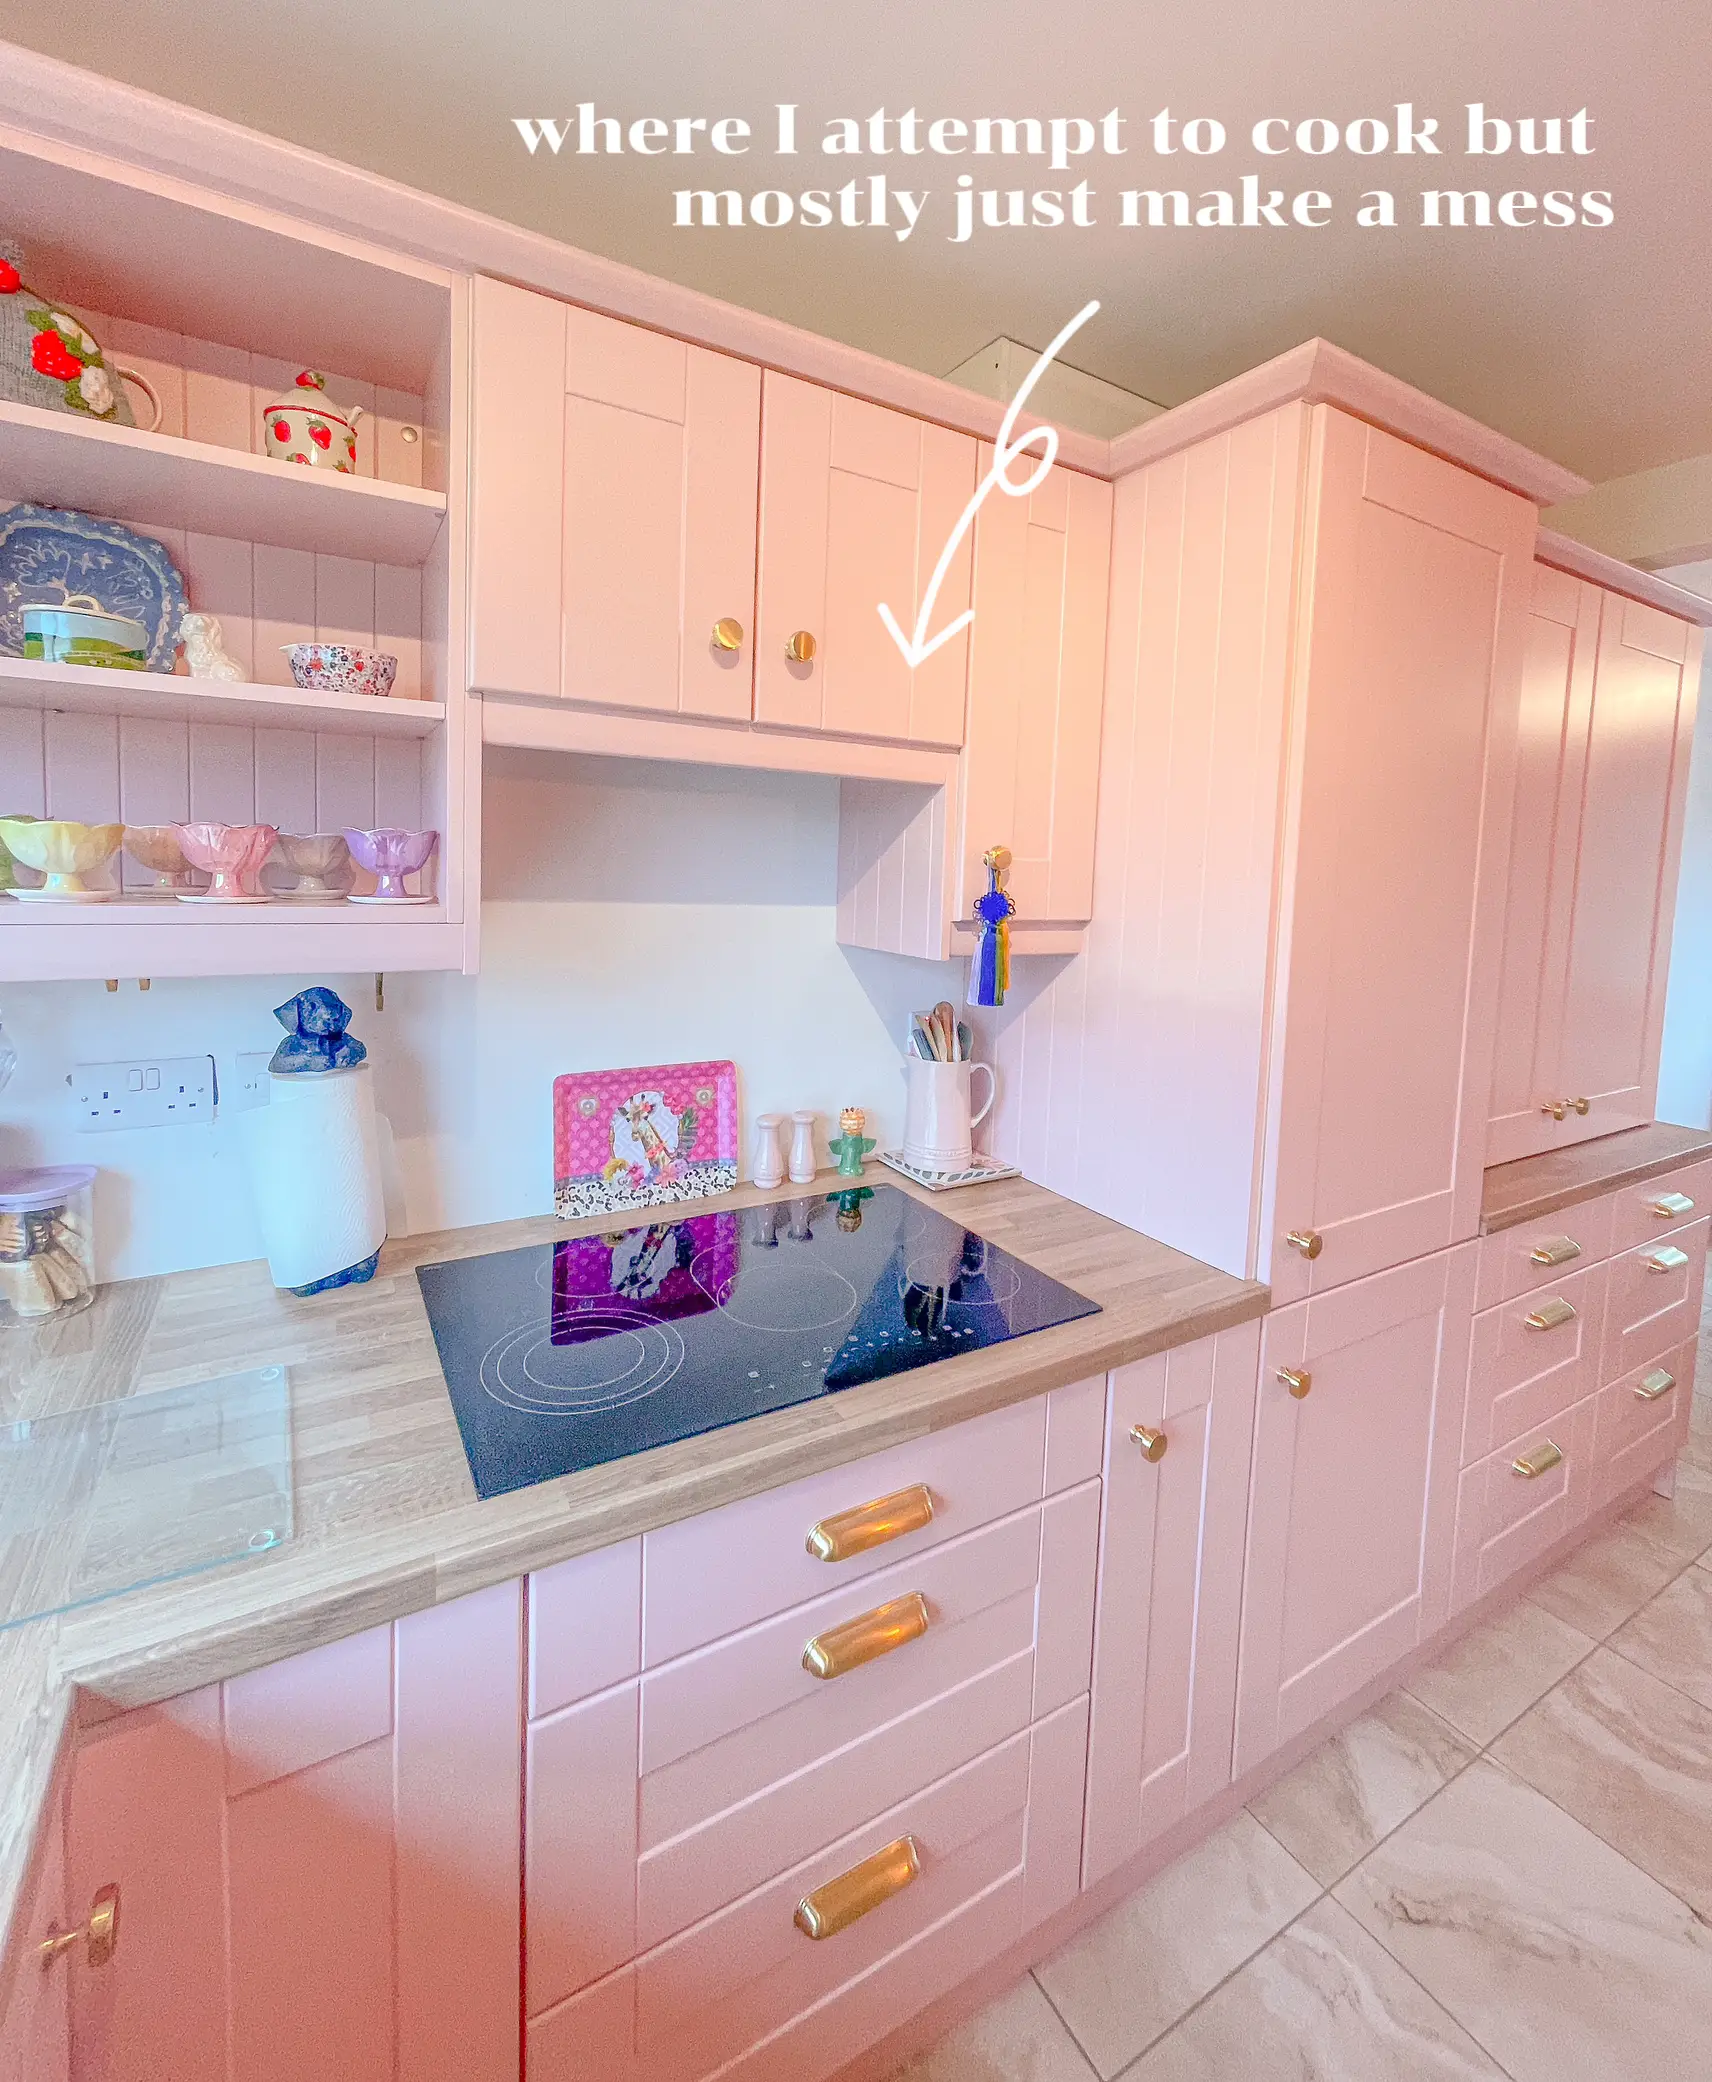 Finally organized my pink kitchen! Update i found a pink microwave  aaaahhh!!! Check my ig stories #feelingproductive #pink #pink #kitchen 💖